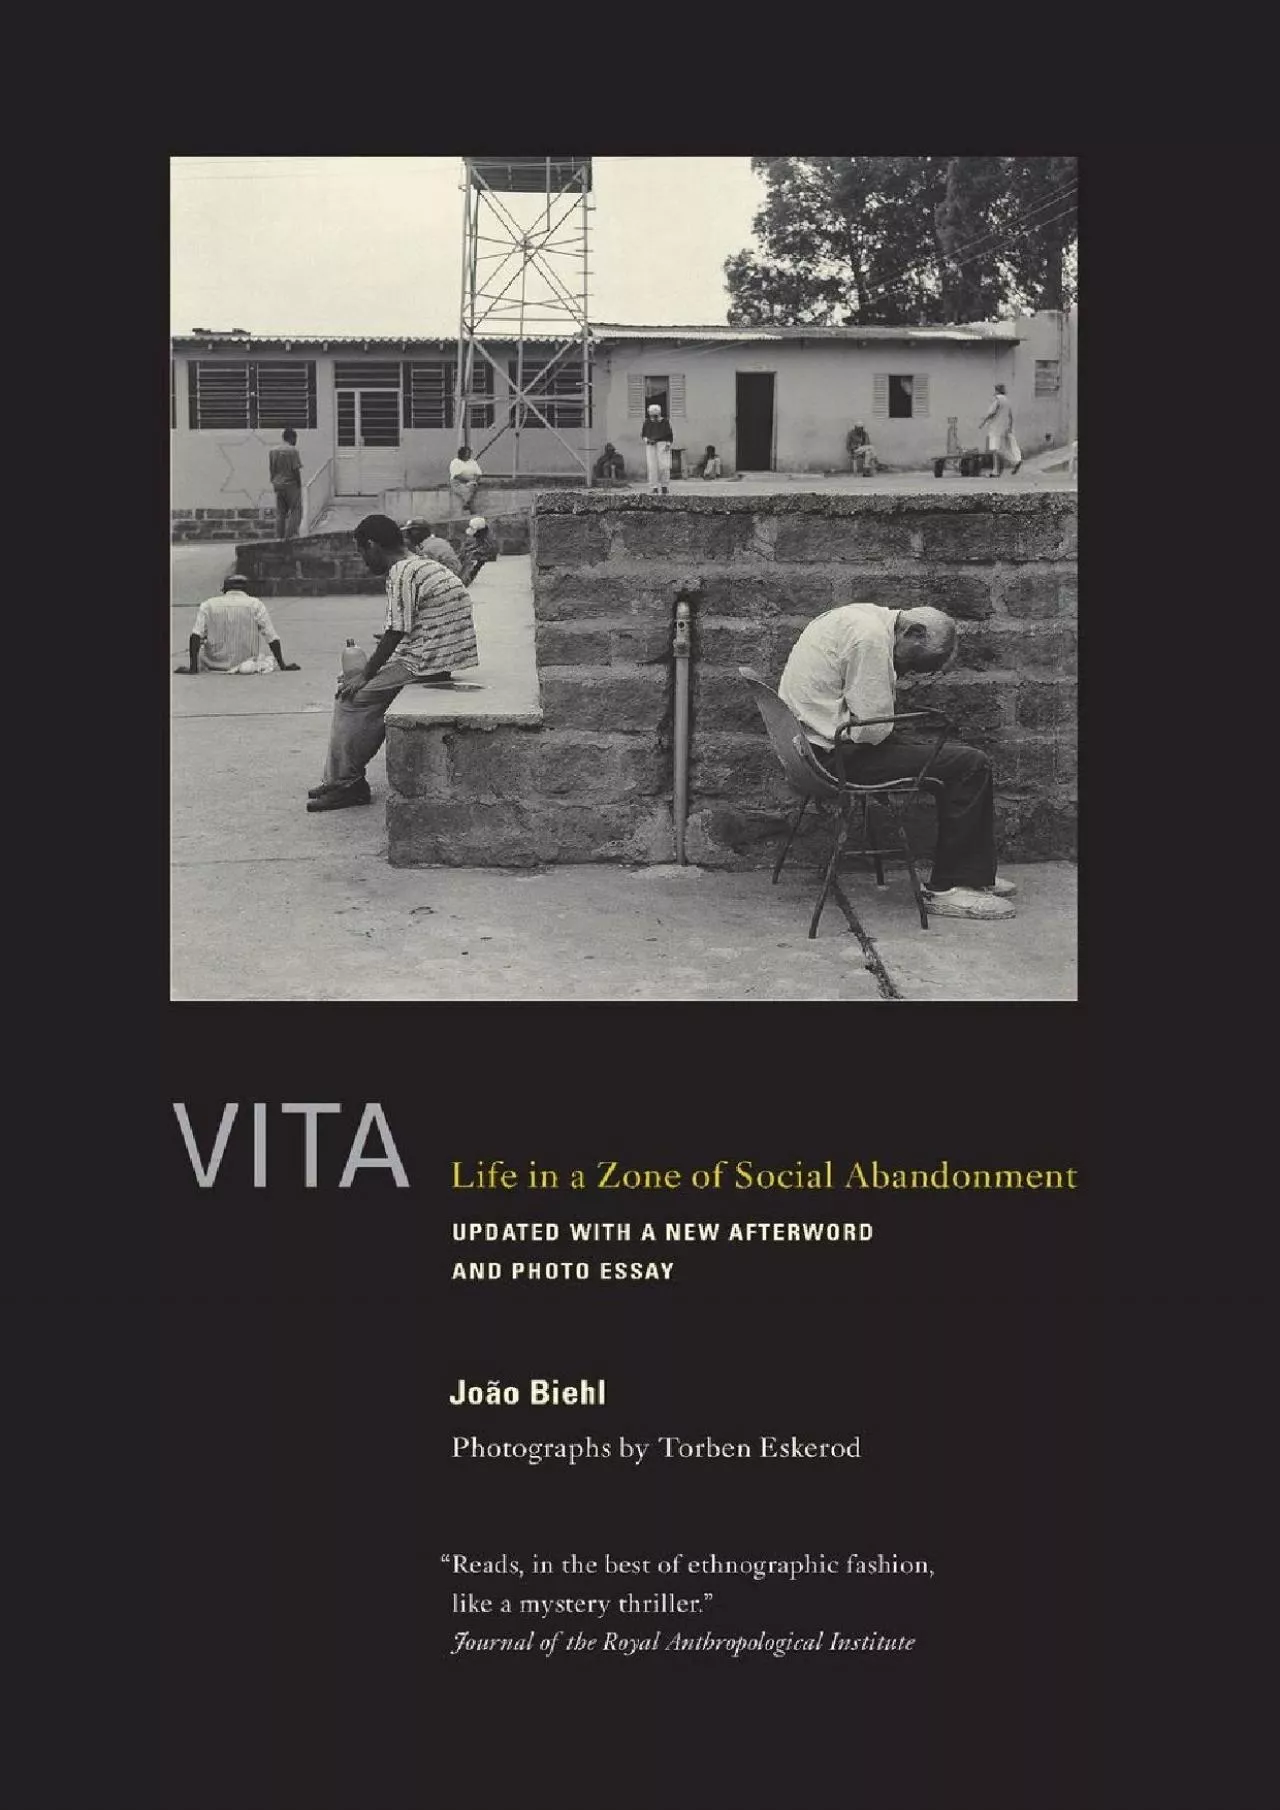 (BOOK)-Vita: Life in a Zone of Social Abandonment